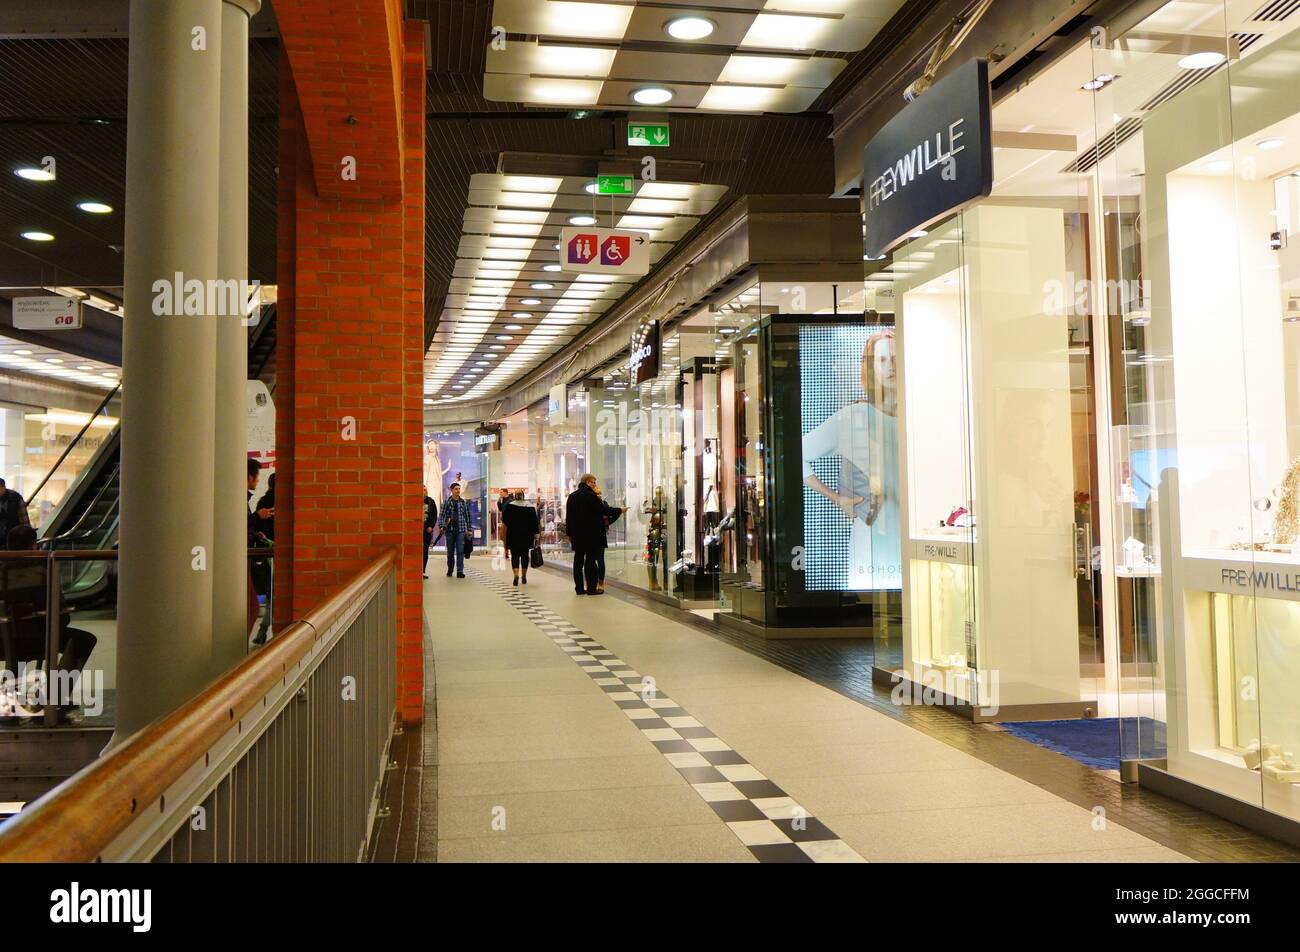 POZNAN, POLAND - Dec 14, 2014: The people walking along stores in the Stary Browar shopping mall in Poznan, Poland Stock Photo